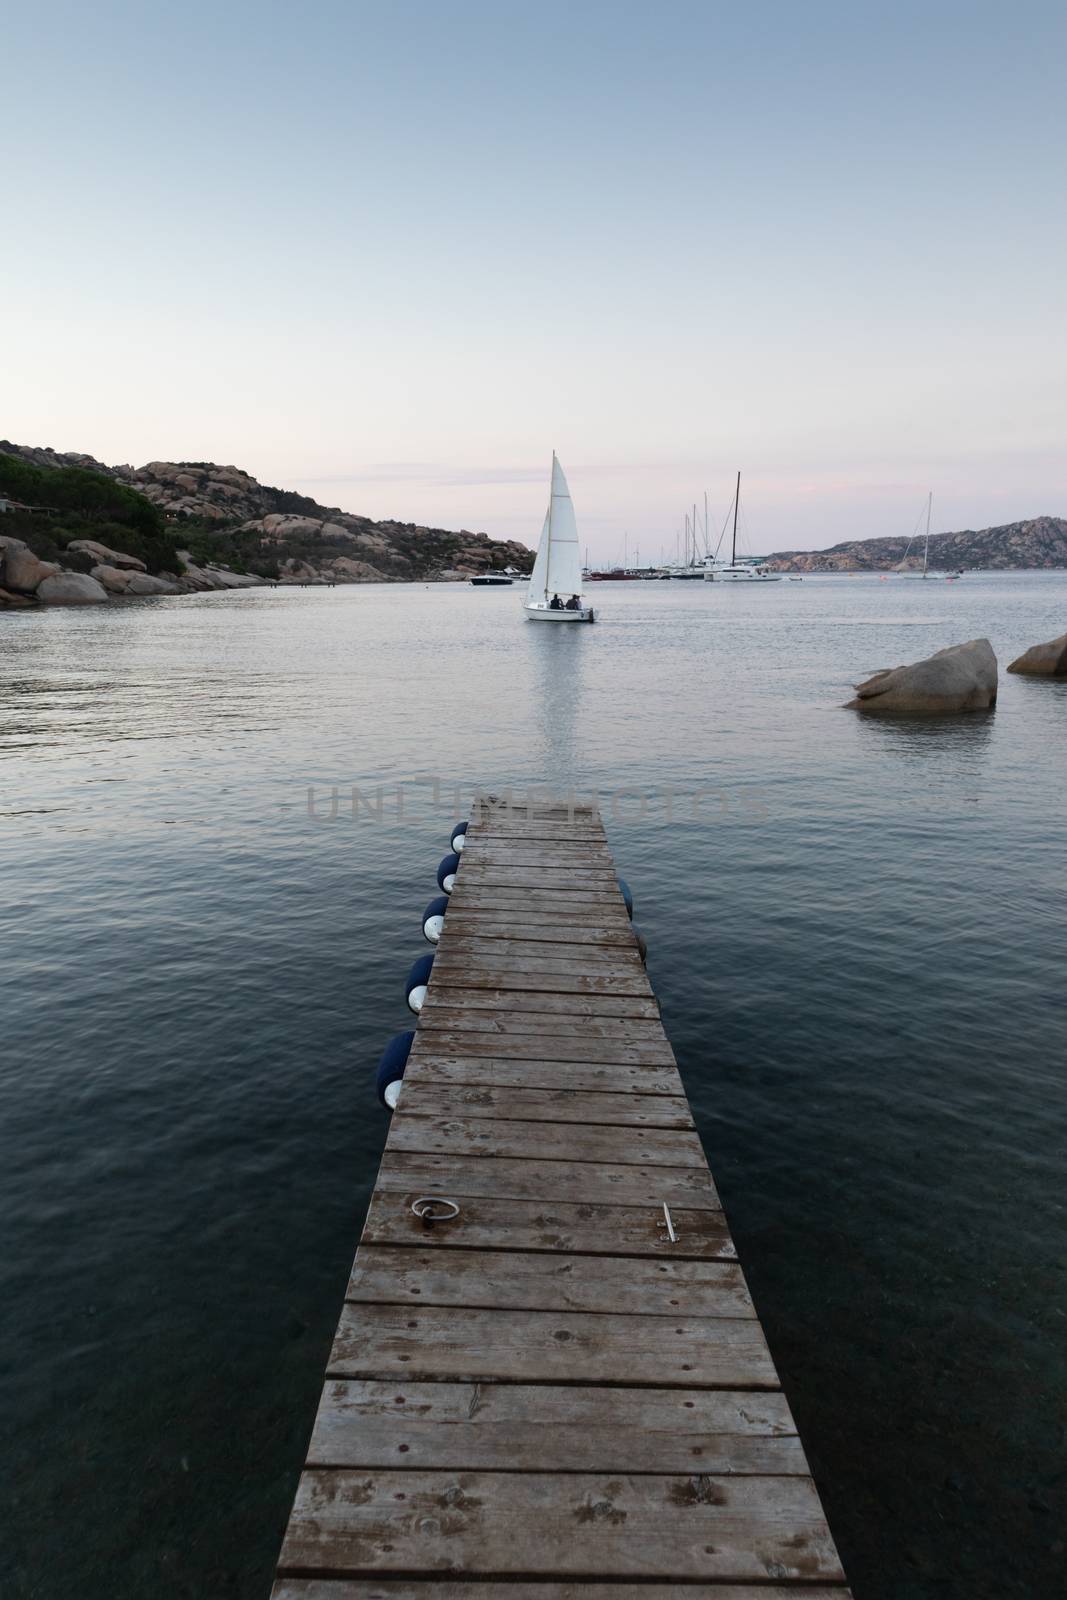 Wooden pier and sailboats sailing in evening calm sea of marvellous Porto Rafael, Costa Smeralda, Sardinia, Italy. Symbol for relaxation, wealth, leisure activity.